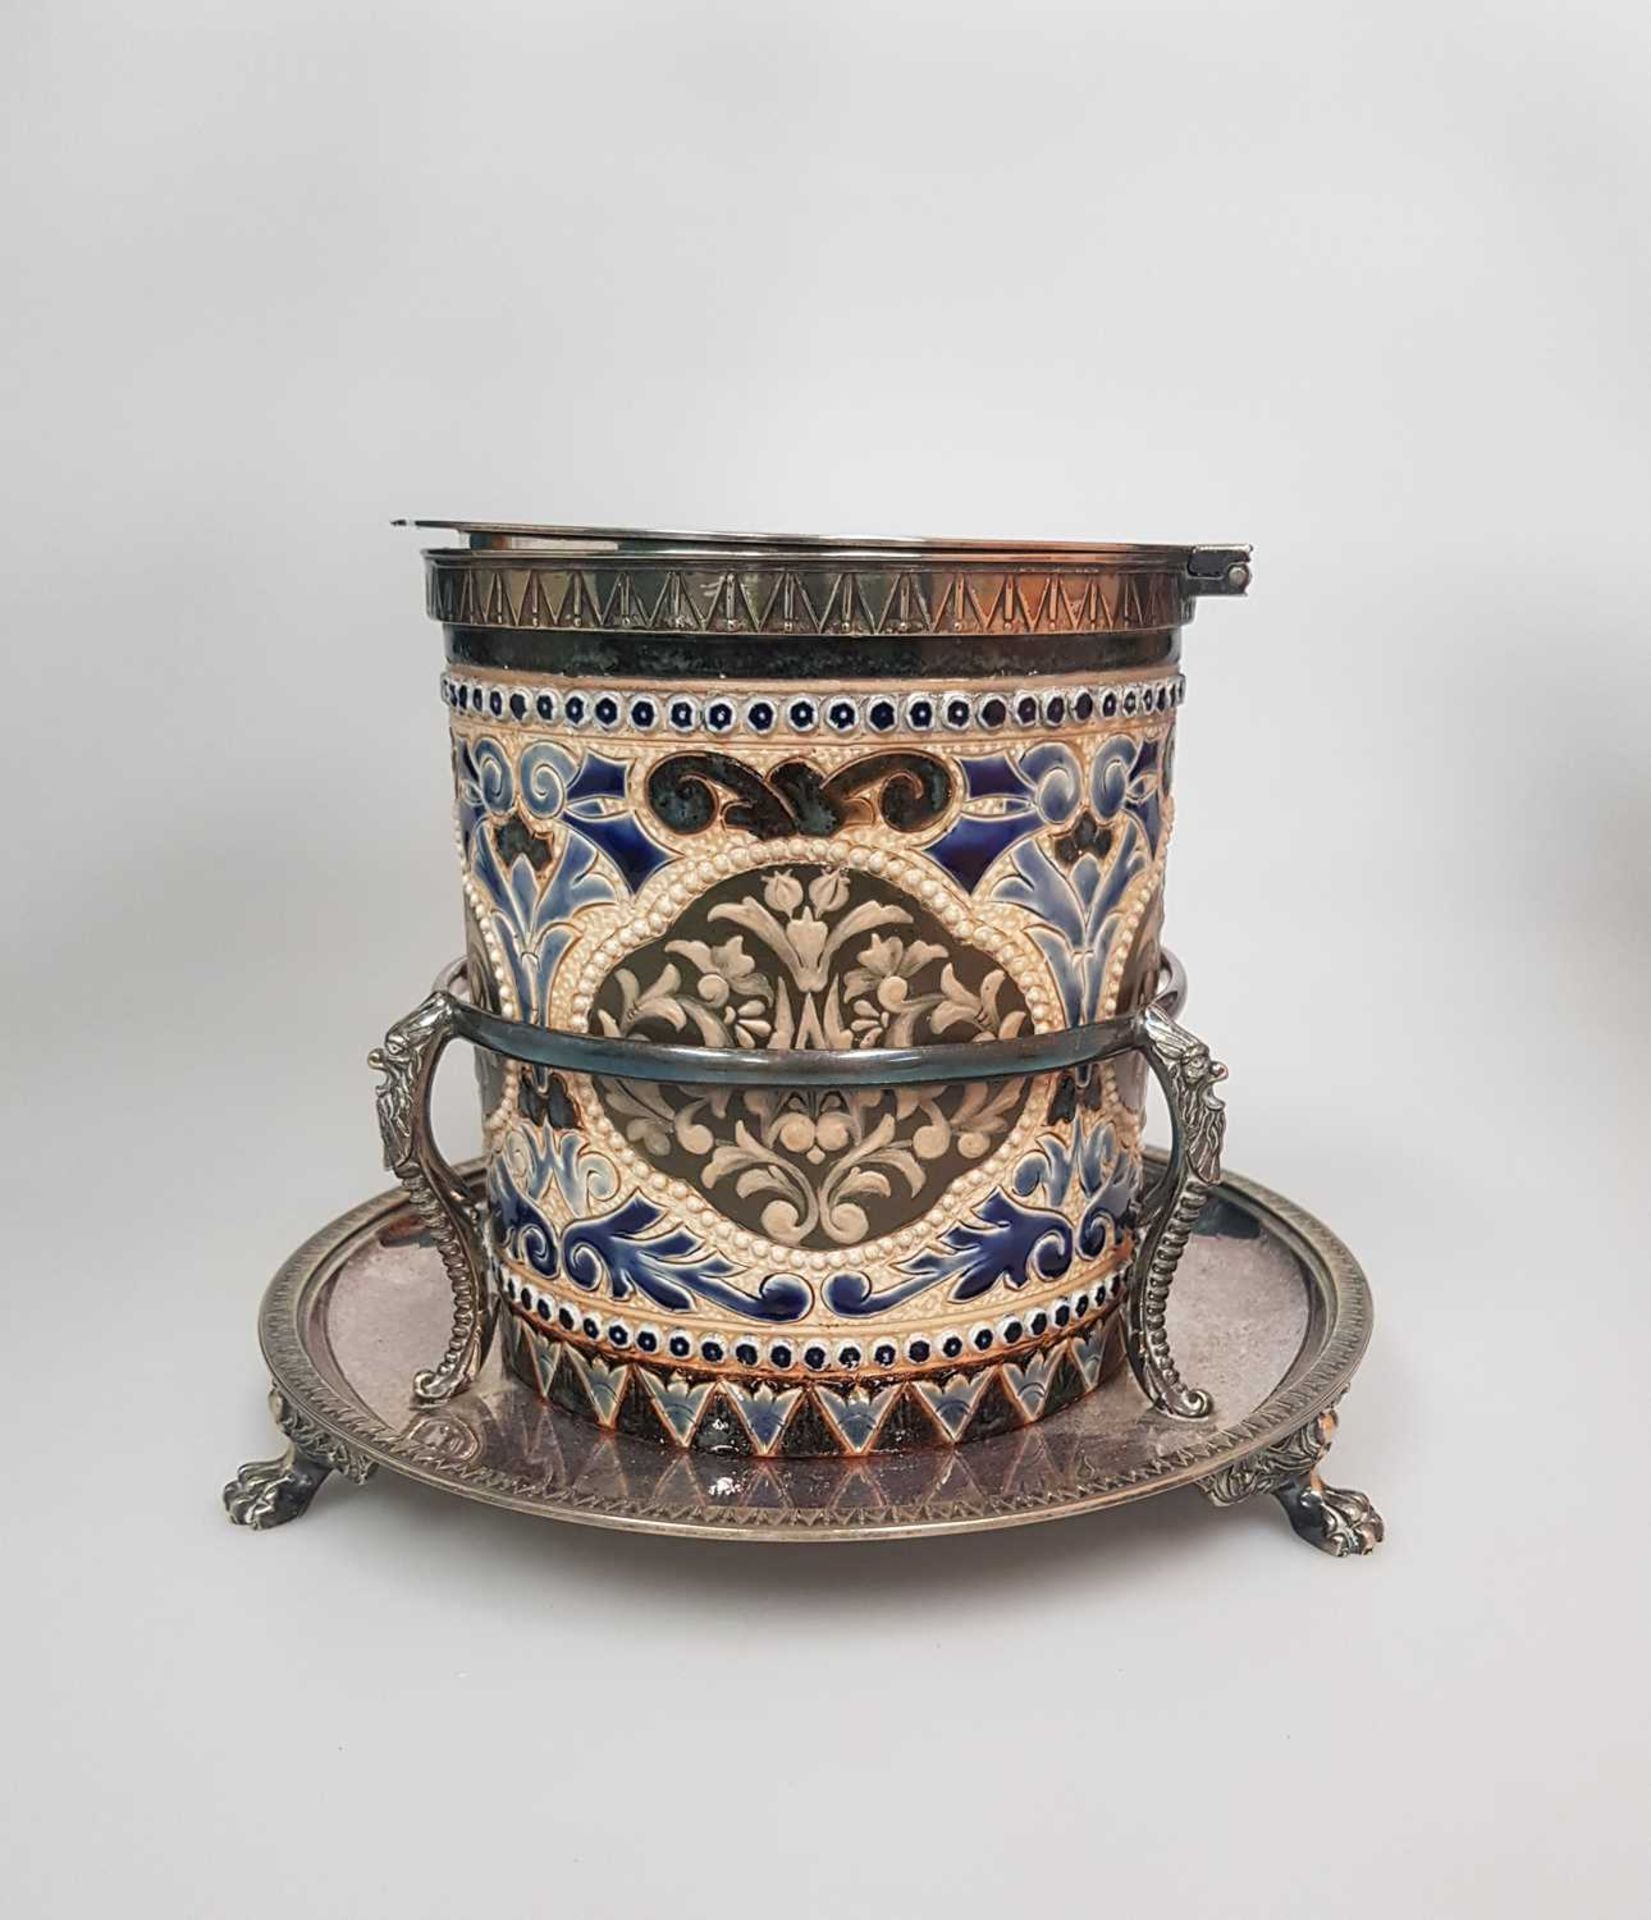 ELIZA SIMMANCE FOR DOULTON LAMBETH, A LATE 19TH CENTURY SILVER PLATE-MOUNTED STONEWARE BISCUIT BARRE